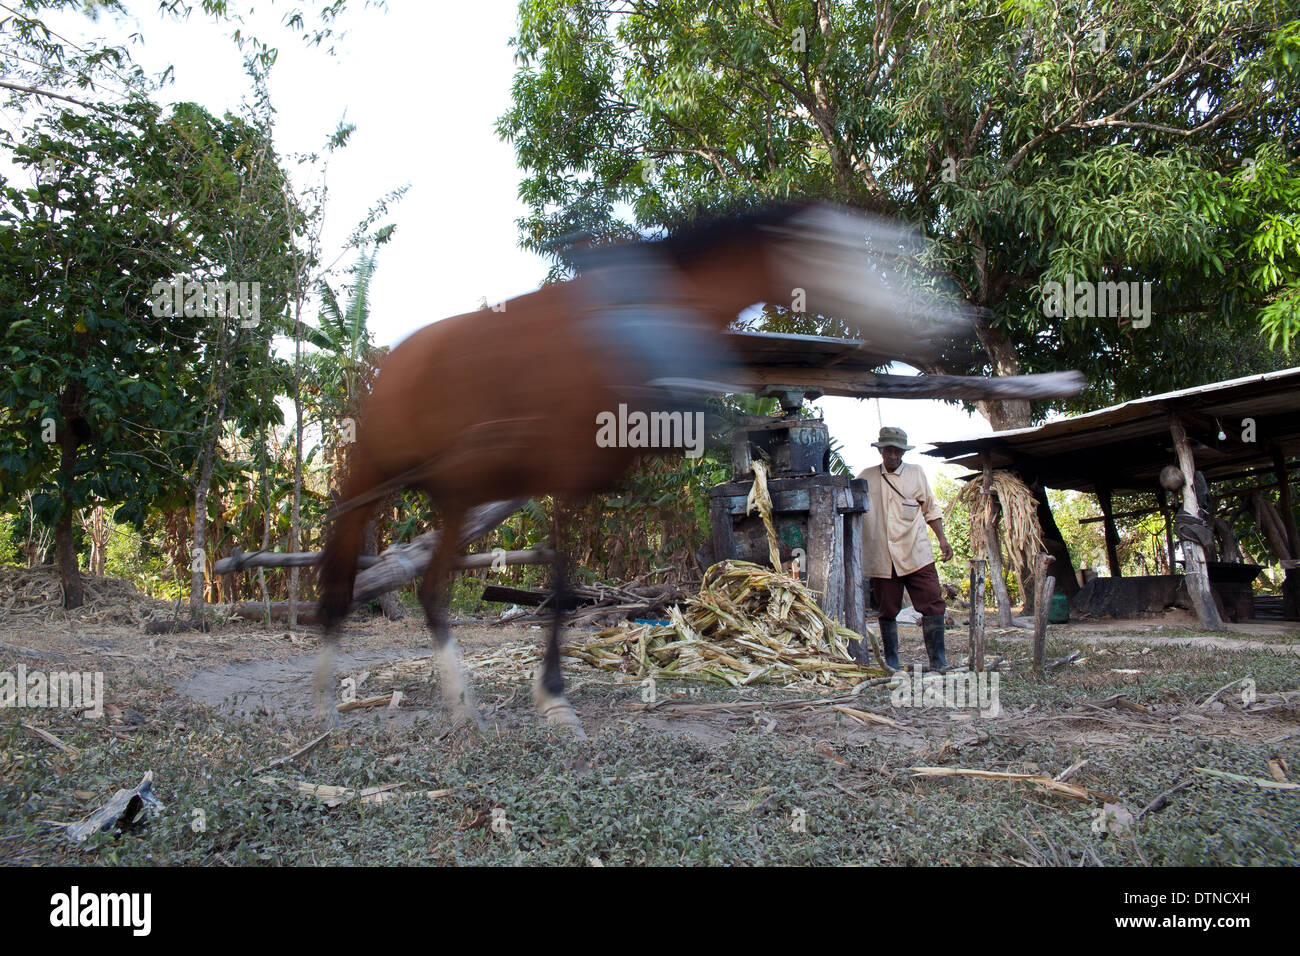 Horse walking in circle to give power to a sugarcane-juice machine, near Penonome, Cocle province, Republic of Panama. Stock Photo